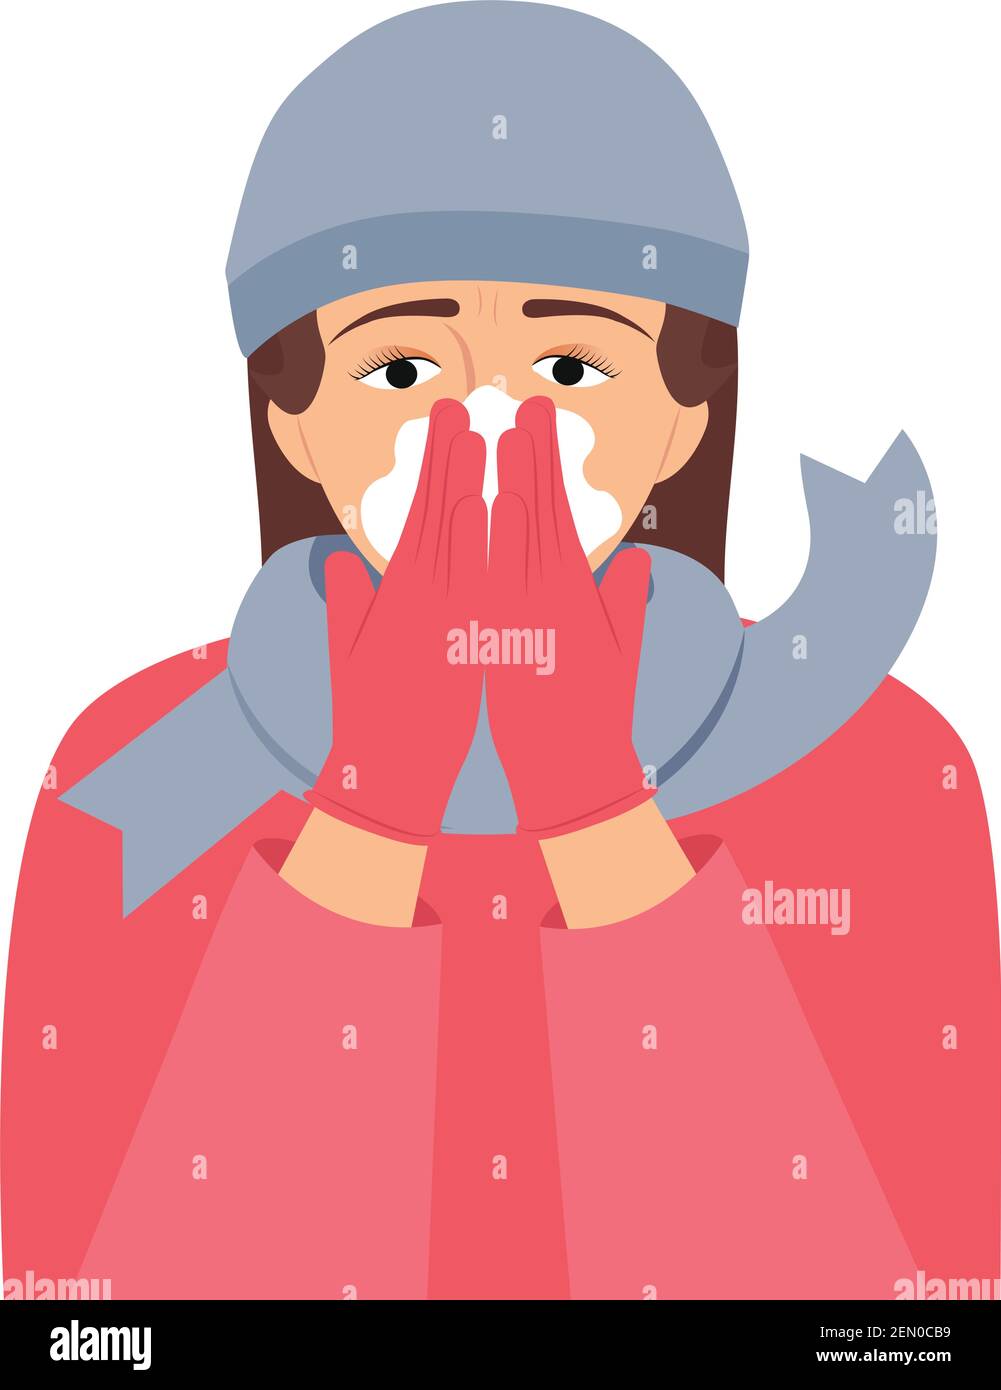 Women use tissue to cover the mouth and nose while coughing and sneezing vector illustration. Female character covers her nose with a handkerchief. Stock Vector